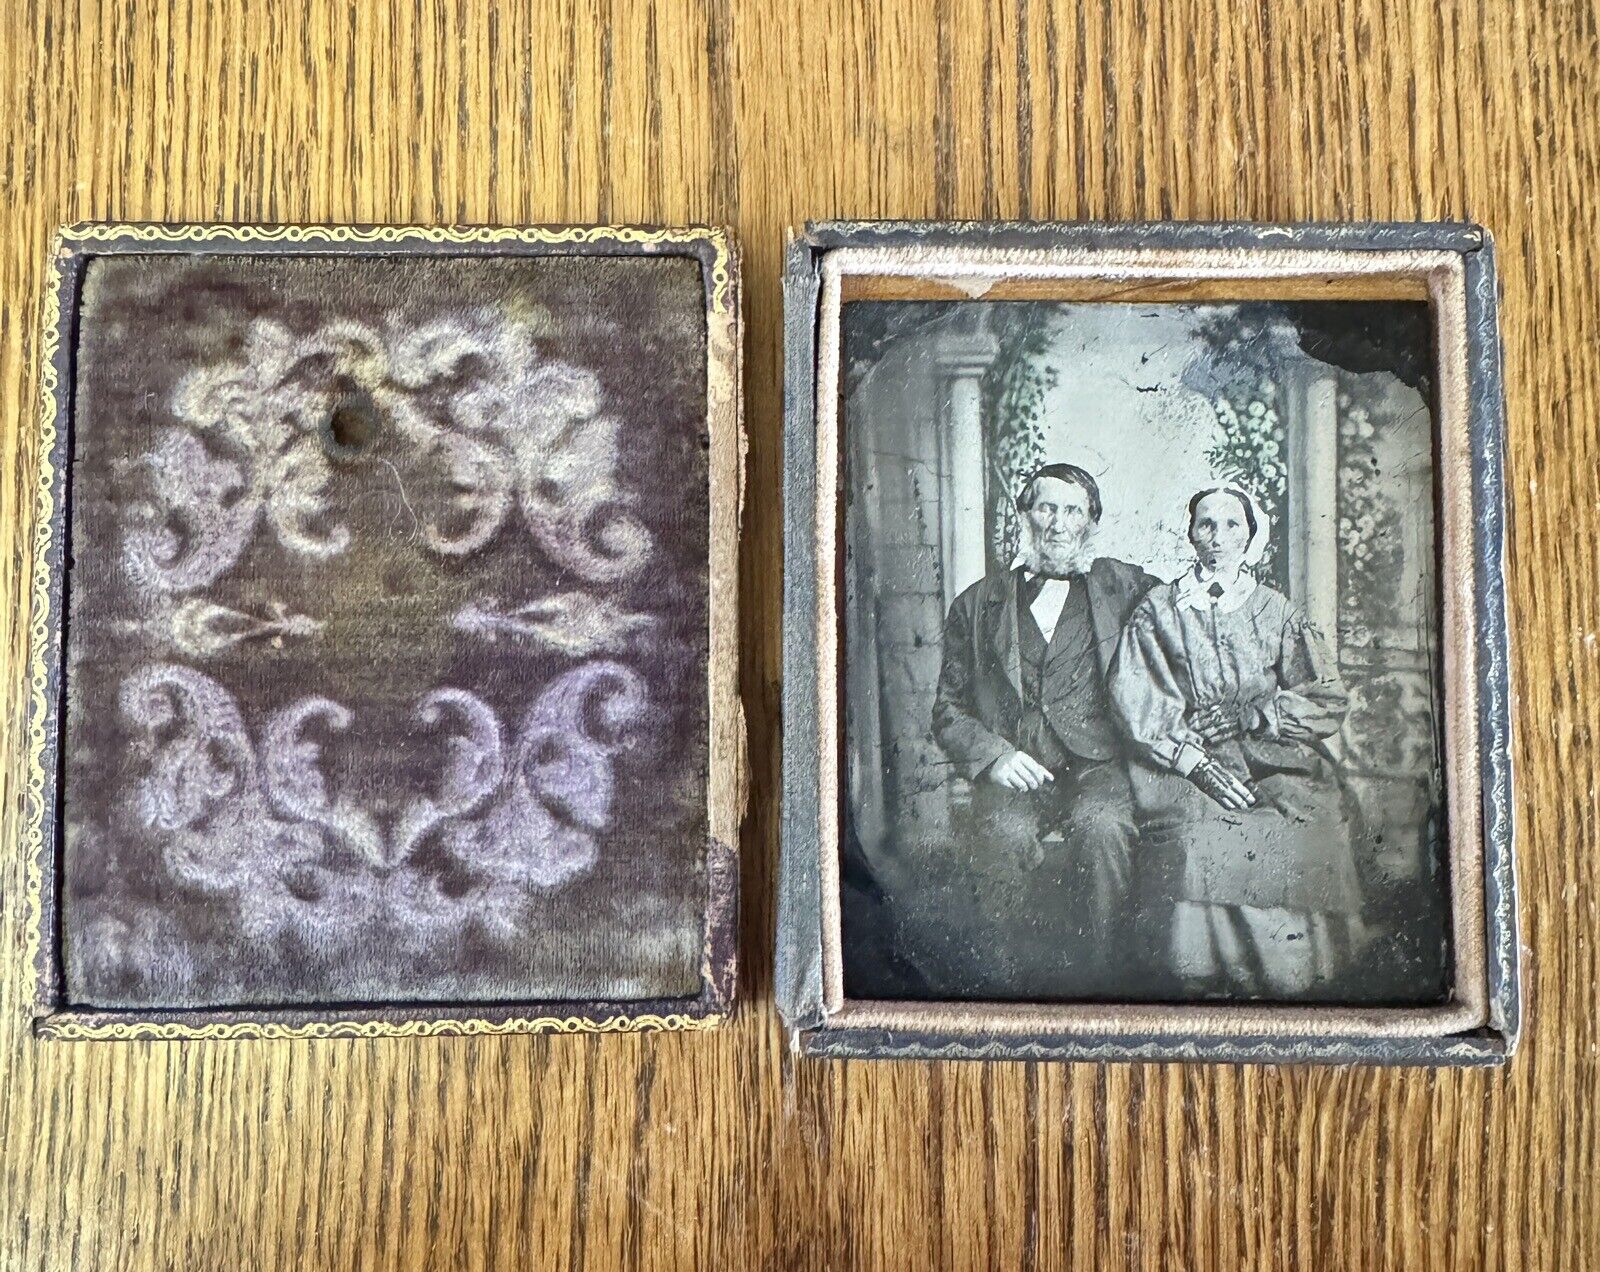 1/6th Plate Ambrotype Of A Couple Sitting Together - Woman is Wearing Gloves